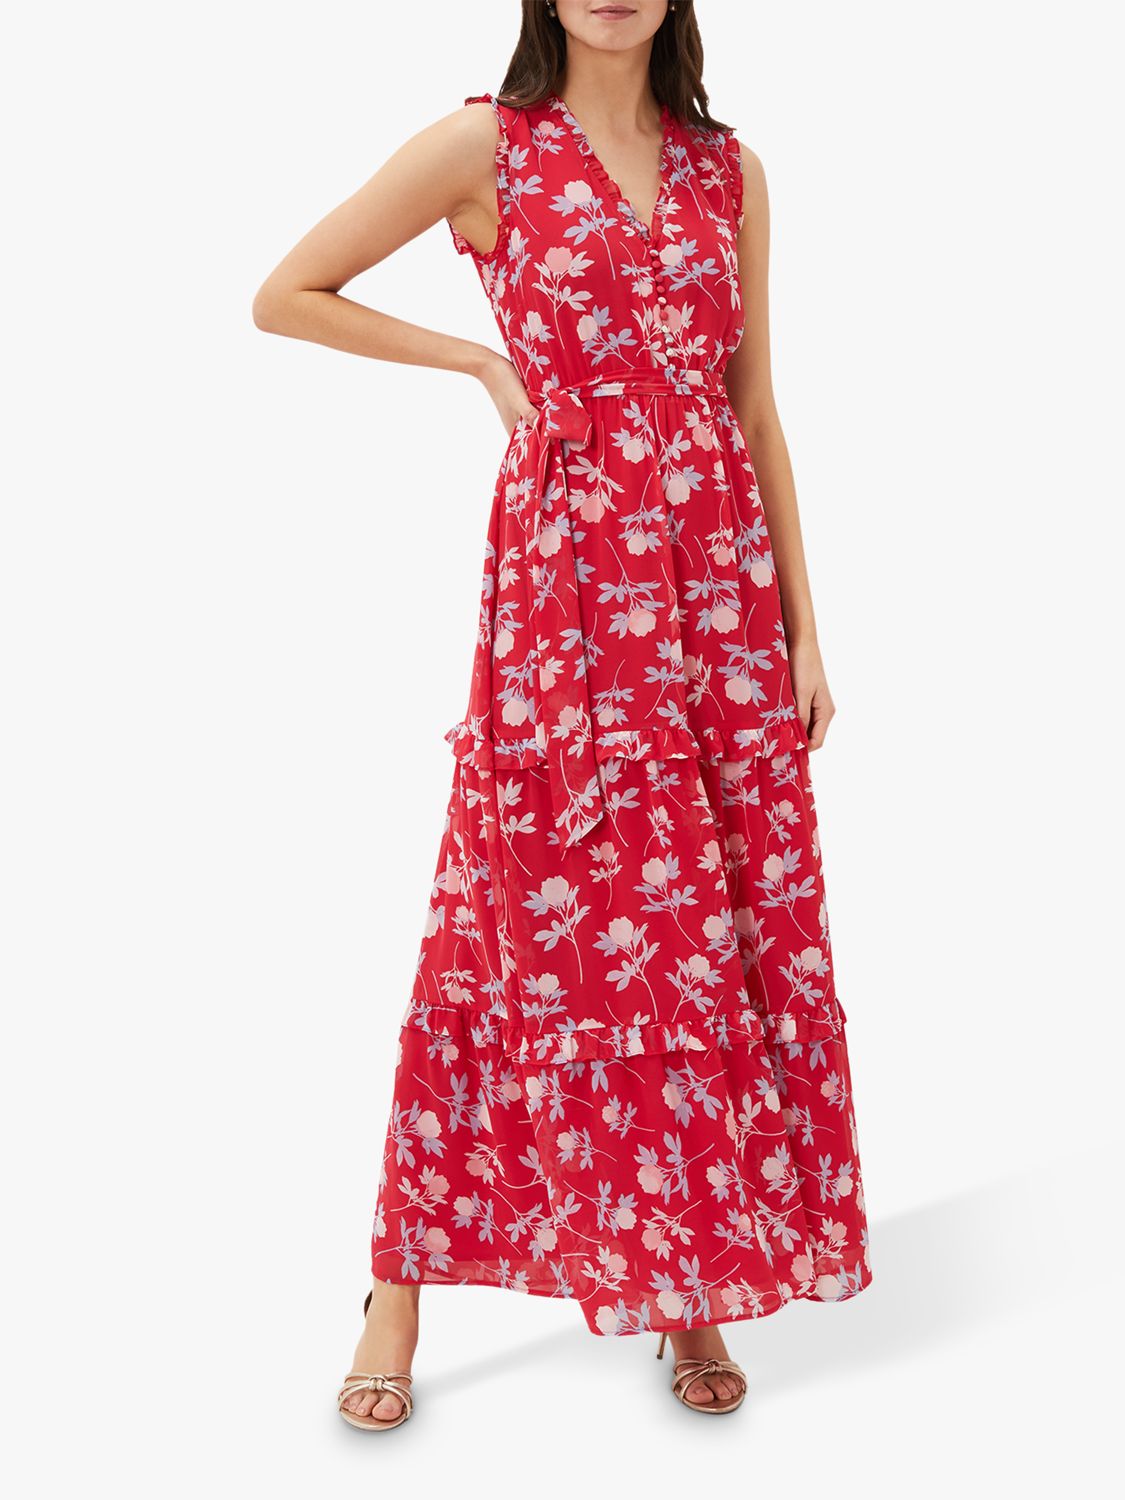 Phase Eight Antonella Floral Tiered Maxi Dress, Lipstick/Pale Blue